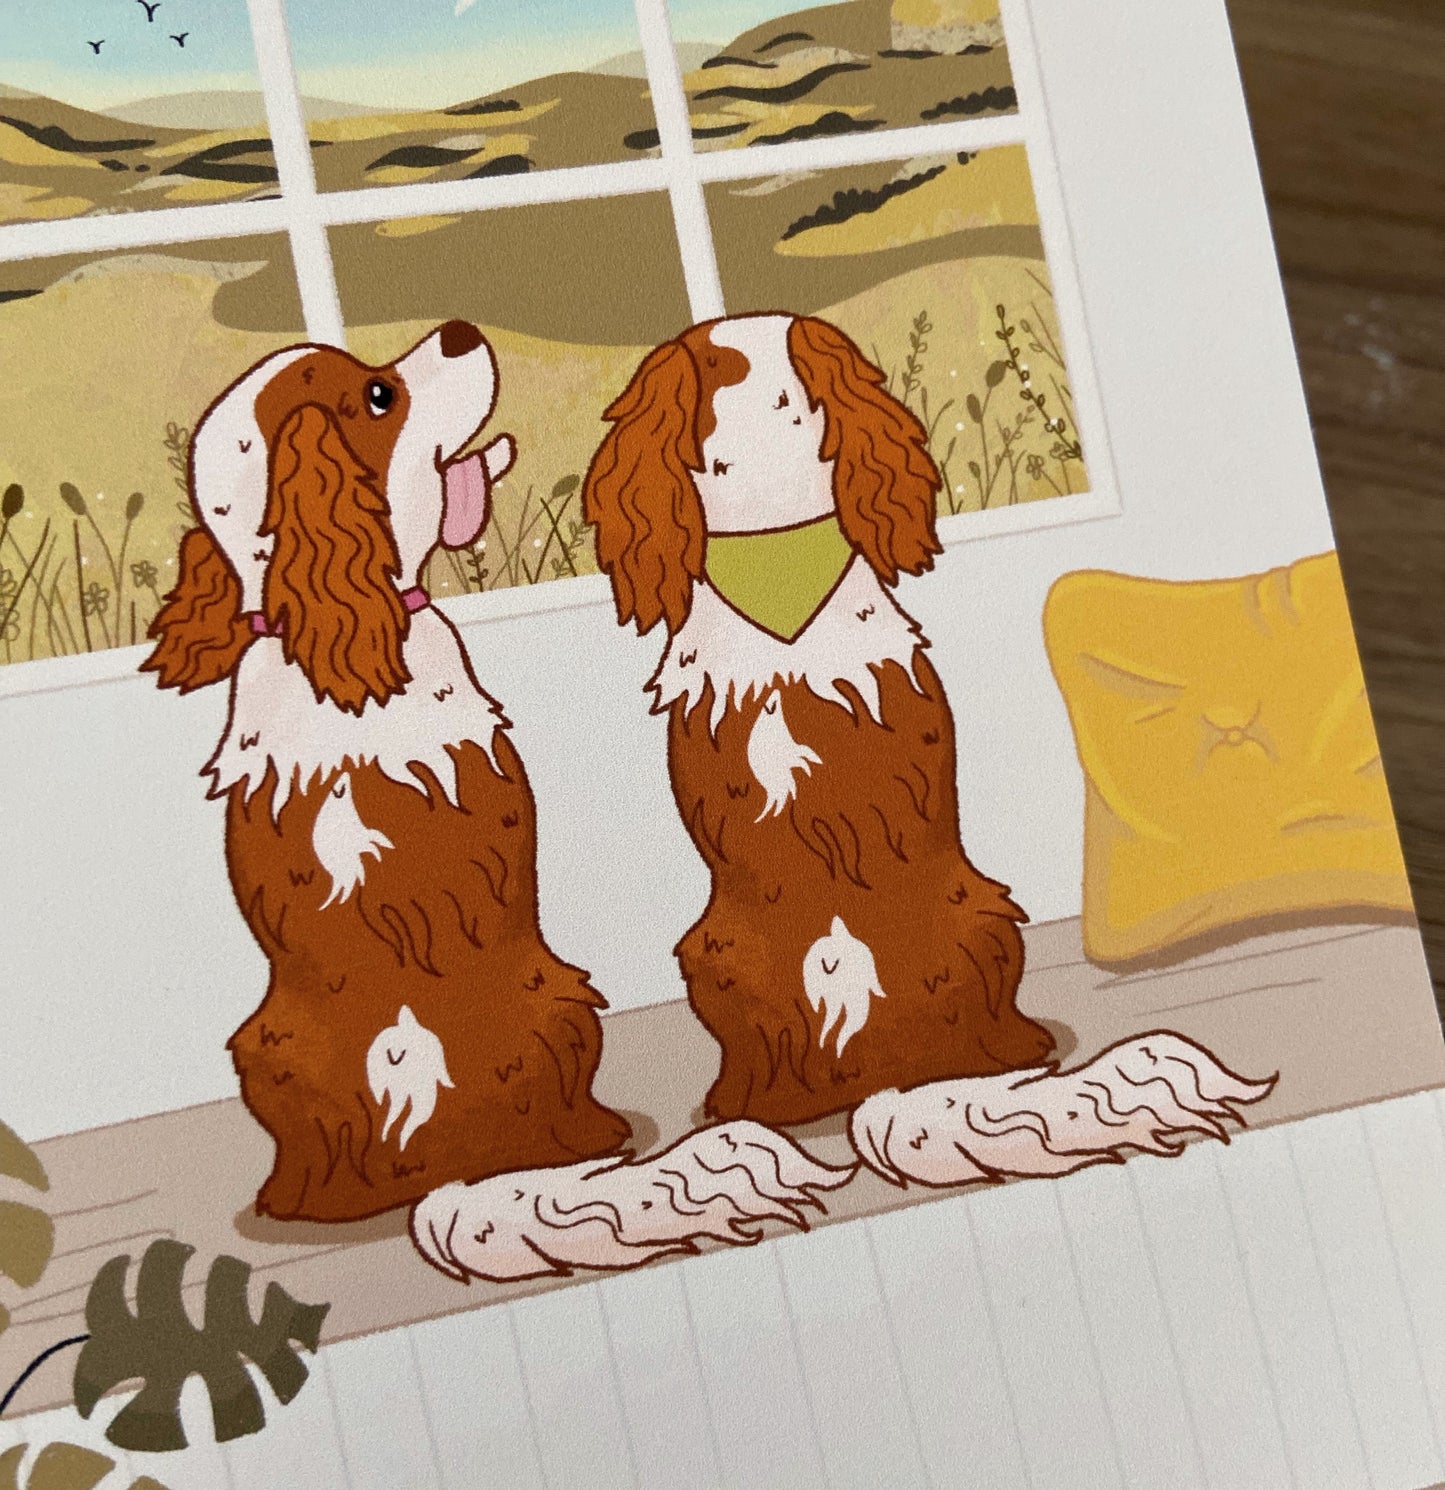 Personalised Dogs Watching the Birds Outside the Window Print (unframed)